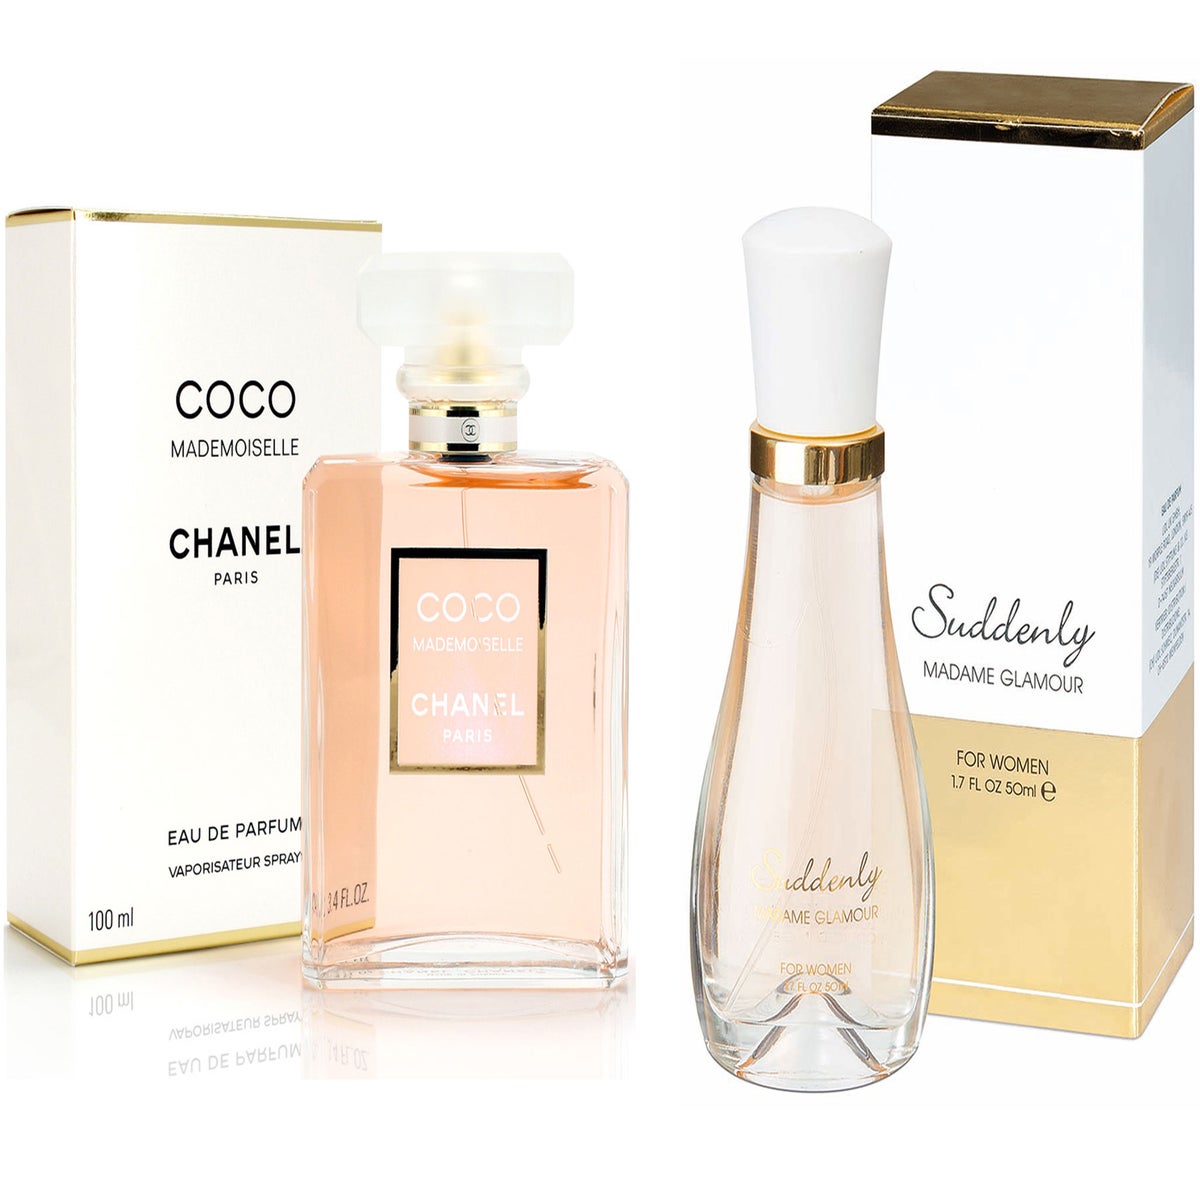 Revealed: Lidl's £4 perfume smells identical to Chanel's £70 scent